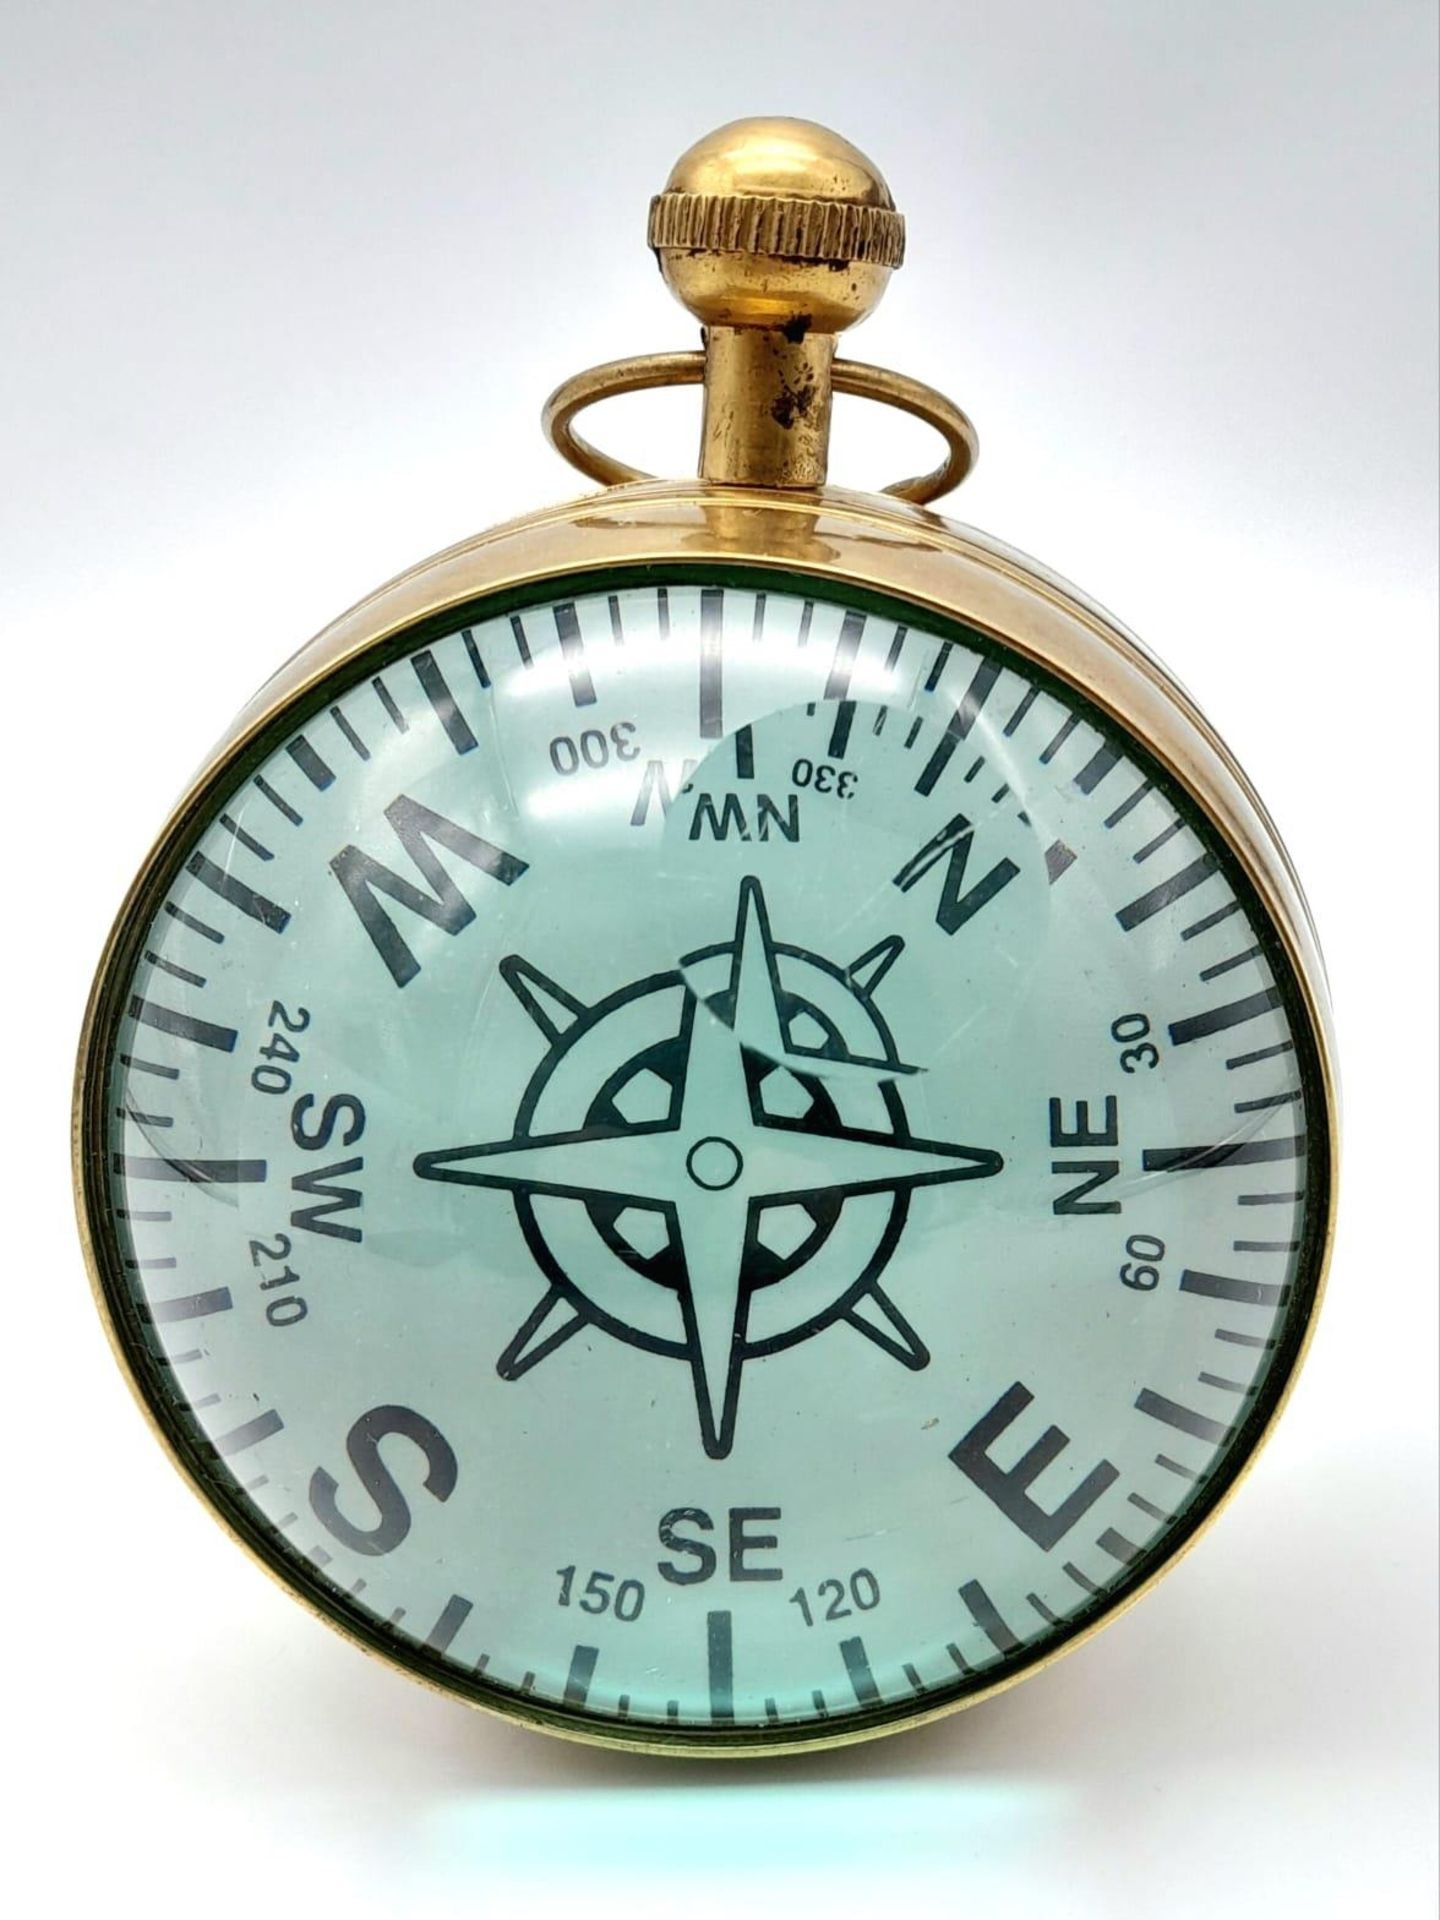 A Railway Regulator Magnification Bedside Ball Clock. 11cm diameter. Battery operated, in working